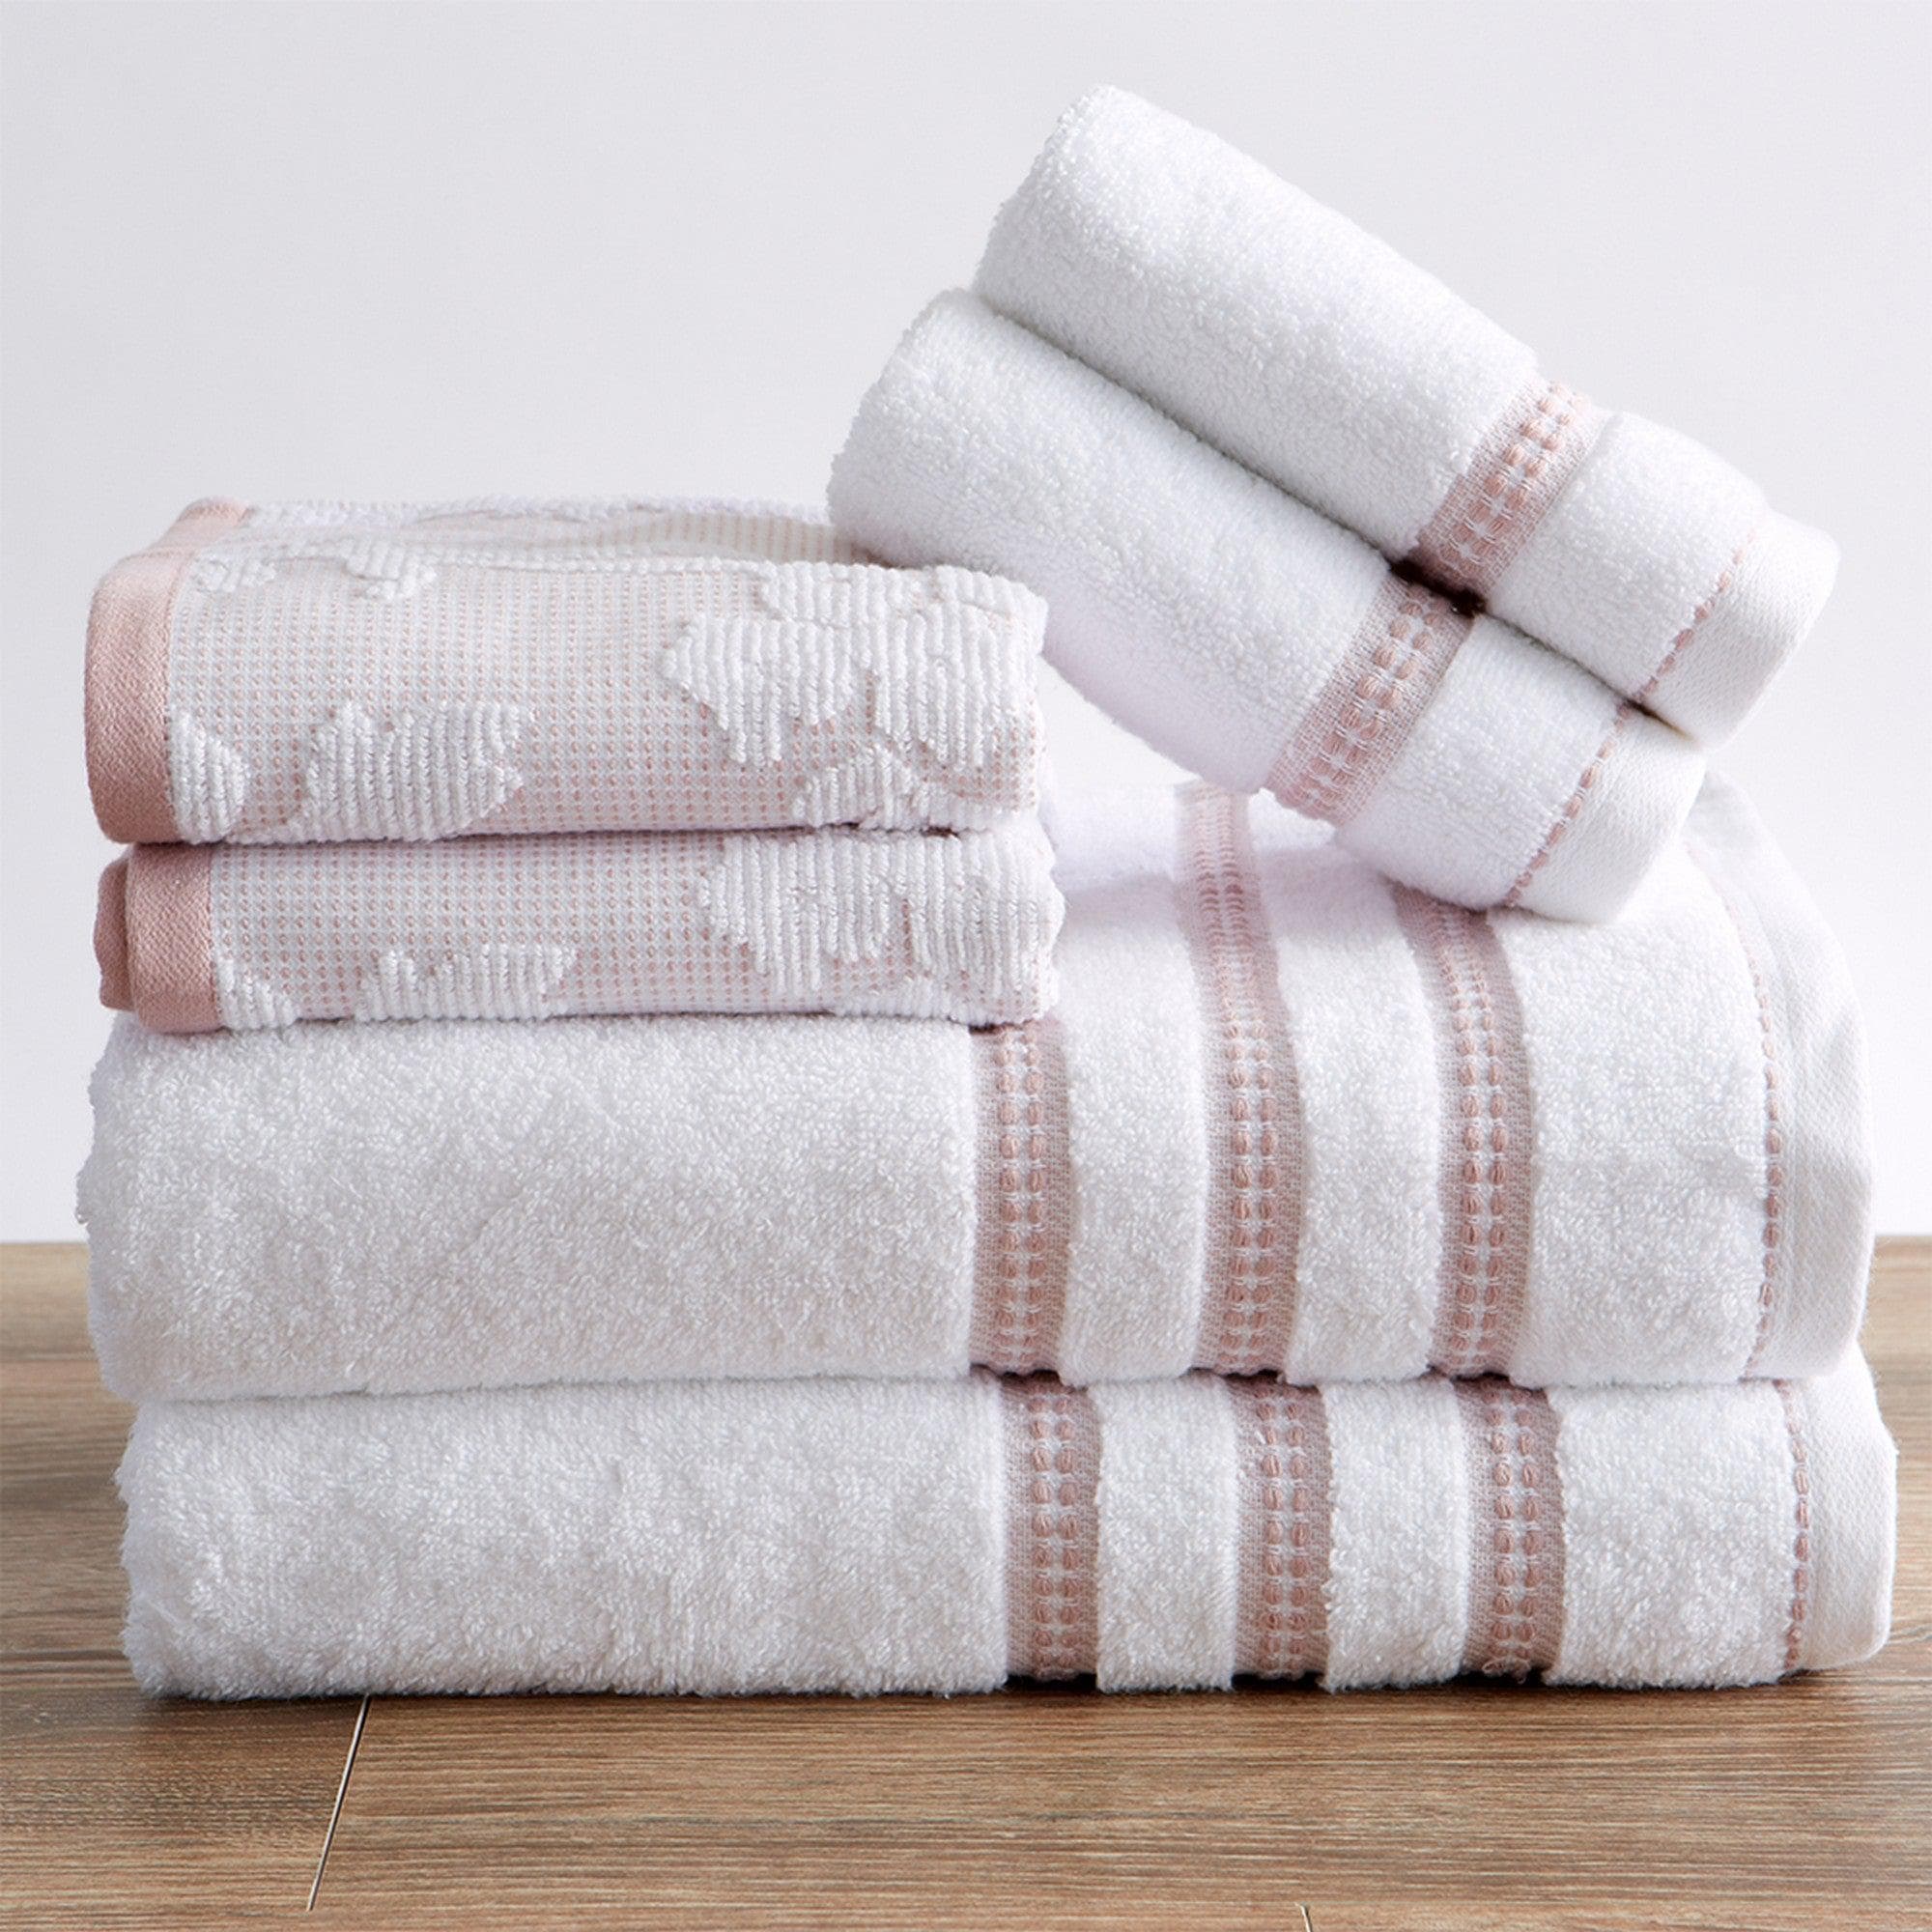 ROSE-SOFT® Bath Towel - 22x44 White Rose Soft, Royal Rose, Terry Towels,  Hotel Towels, Nursing Home Towels, Prison Towels [TTR023] - $3.55 : BC  Textile Innovations, - Commercial Linen, Uniforms, and related Laundry  Supplies